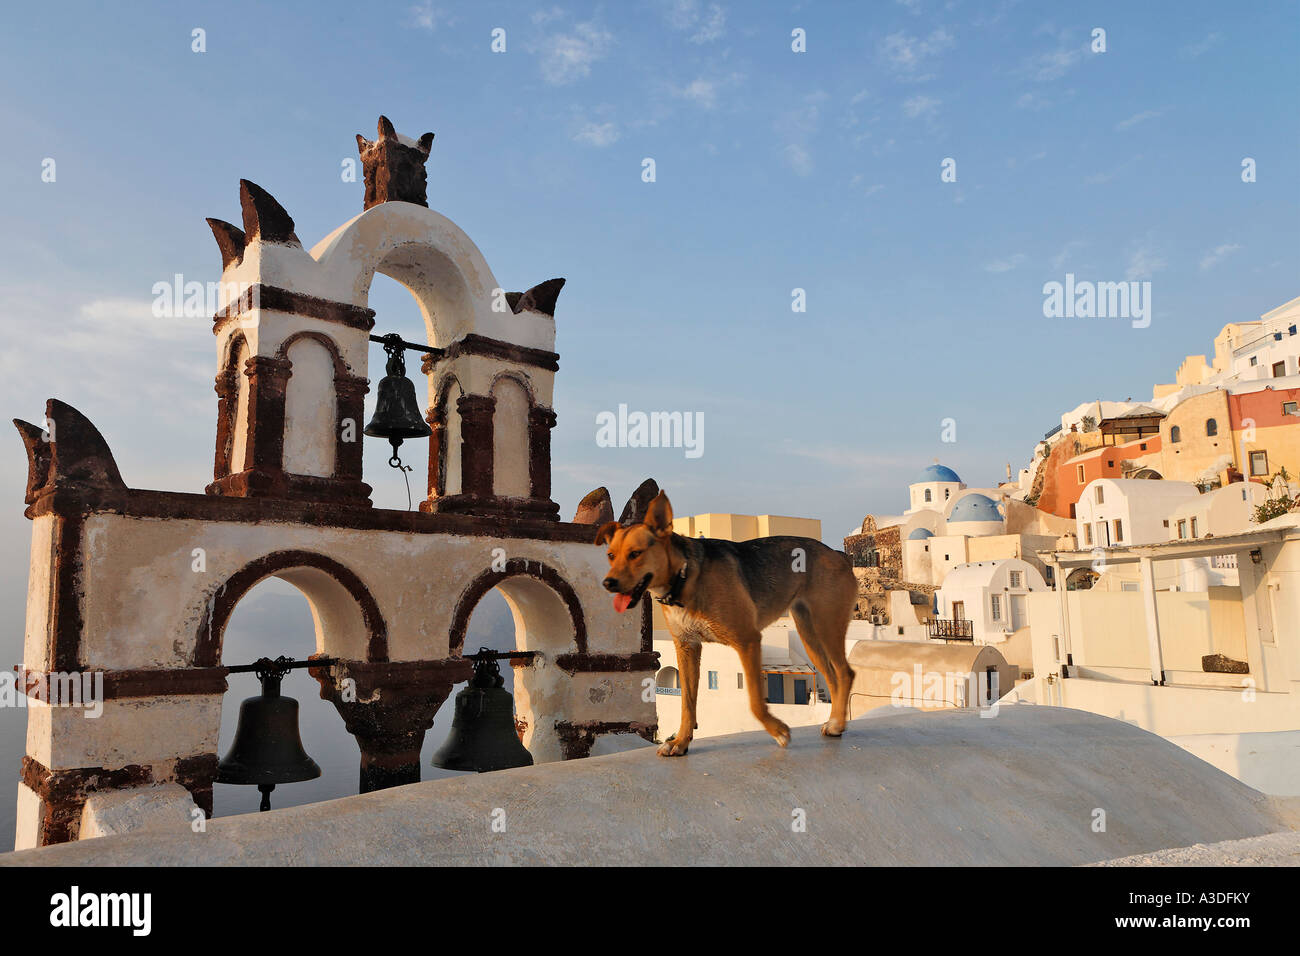 A dog before the bell tower of a small church, Oia, Santorini, Greece Stock Photo